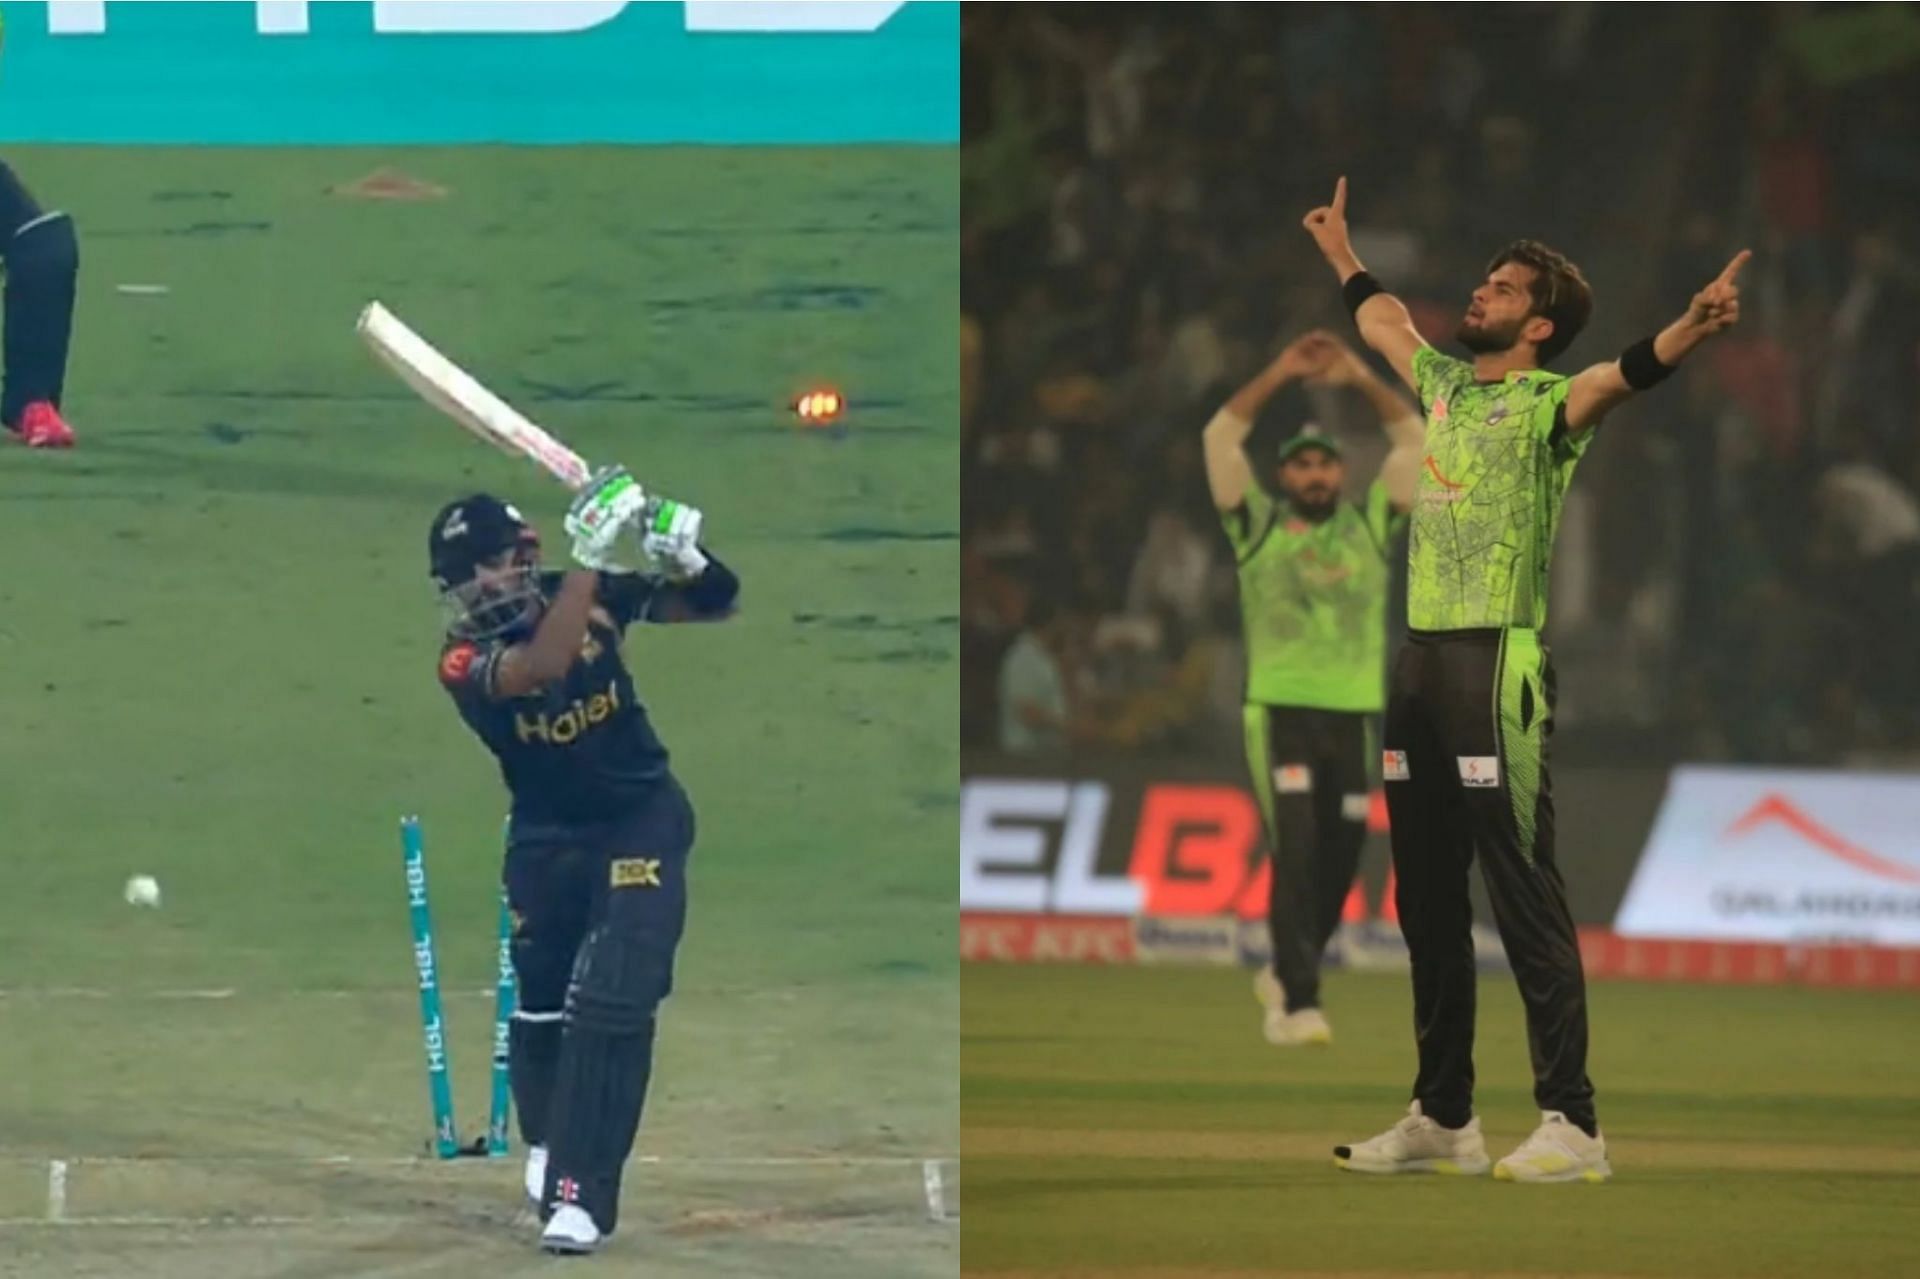 Shaheen Afridi (R) dismissed Babar Azam (L) with a beauty on Sunday 